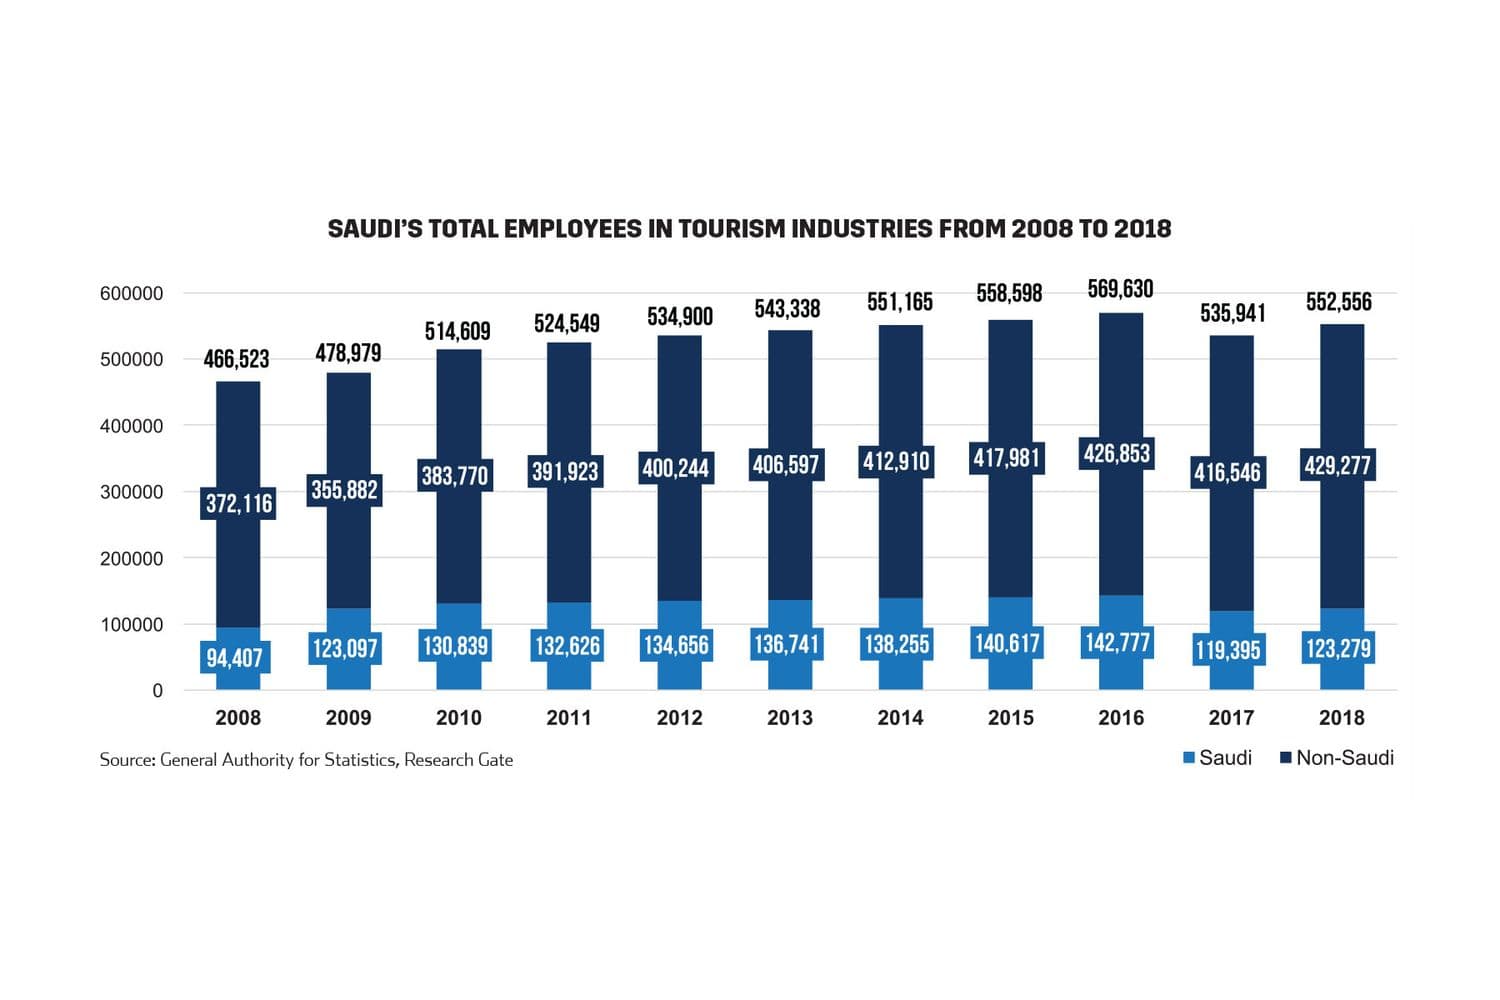 Saudi’s total employees in tourism industries from 2008 to 2018